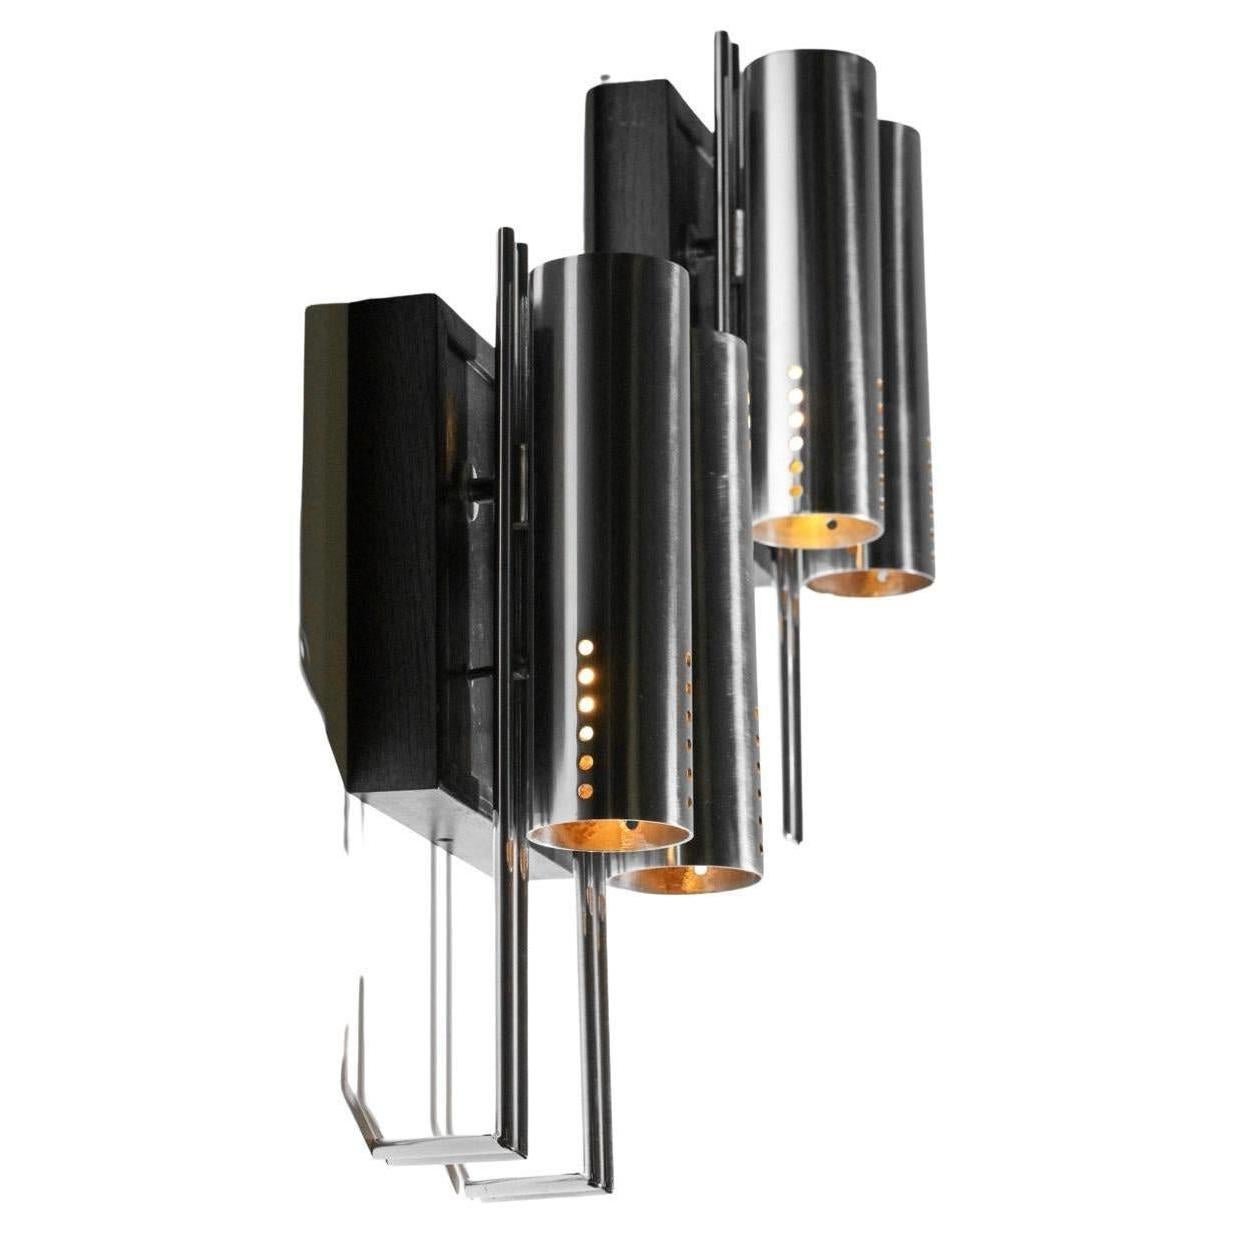 Set of 3 pairs of Italian sconces from the 70s. Structure and lampshade in chrome-plated metal and perforated on the top of the diffusers. Base in solid blackened oak. Very nice pair of modernist sconces with a clean and elegant design. Traces of